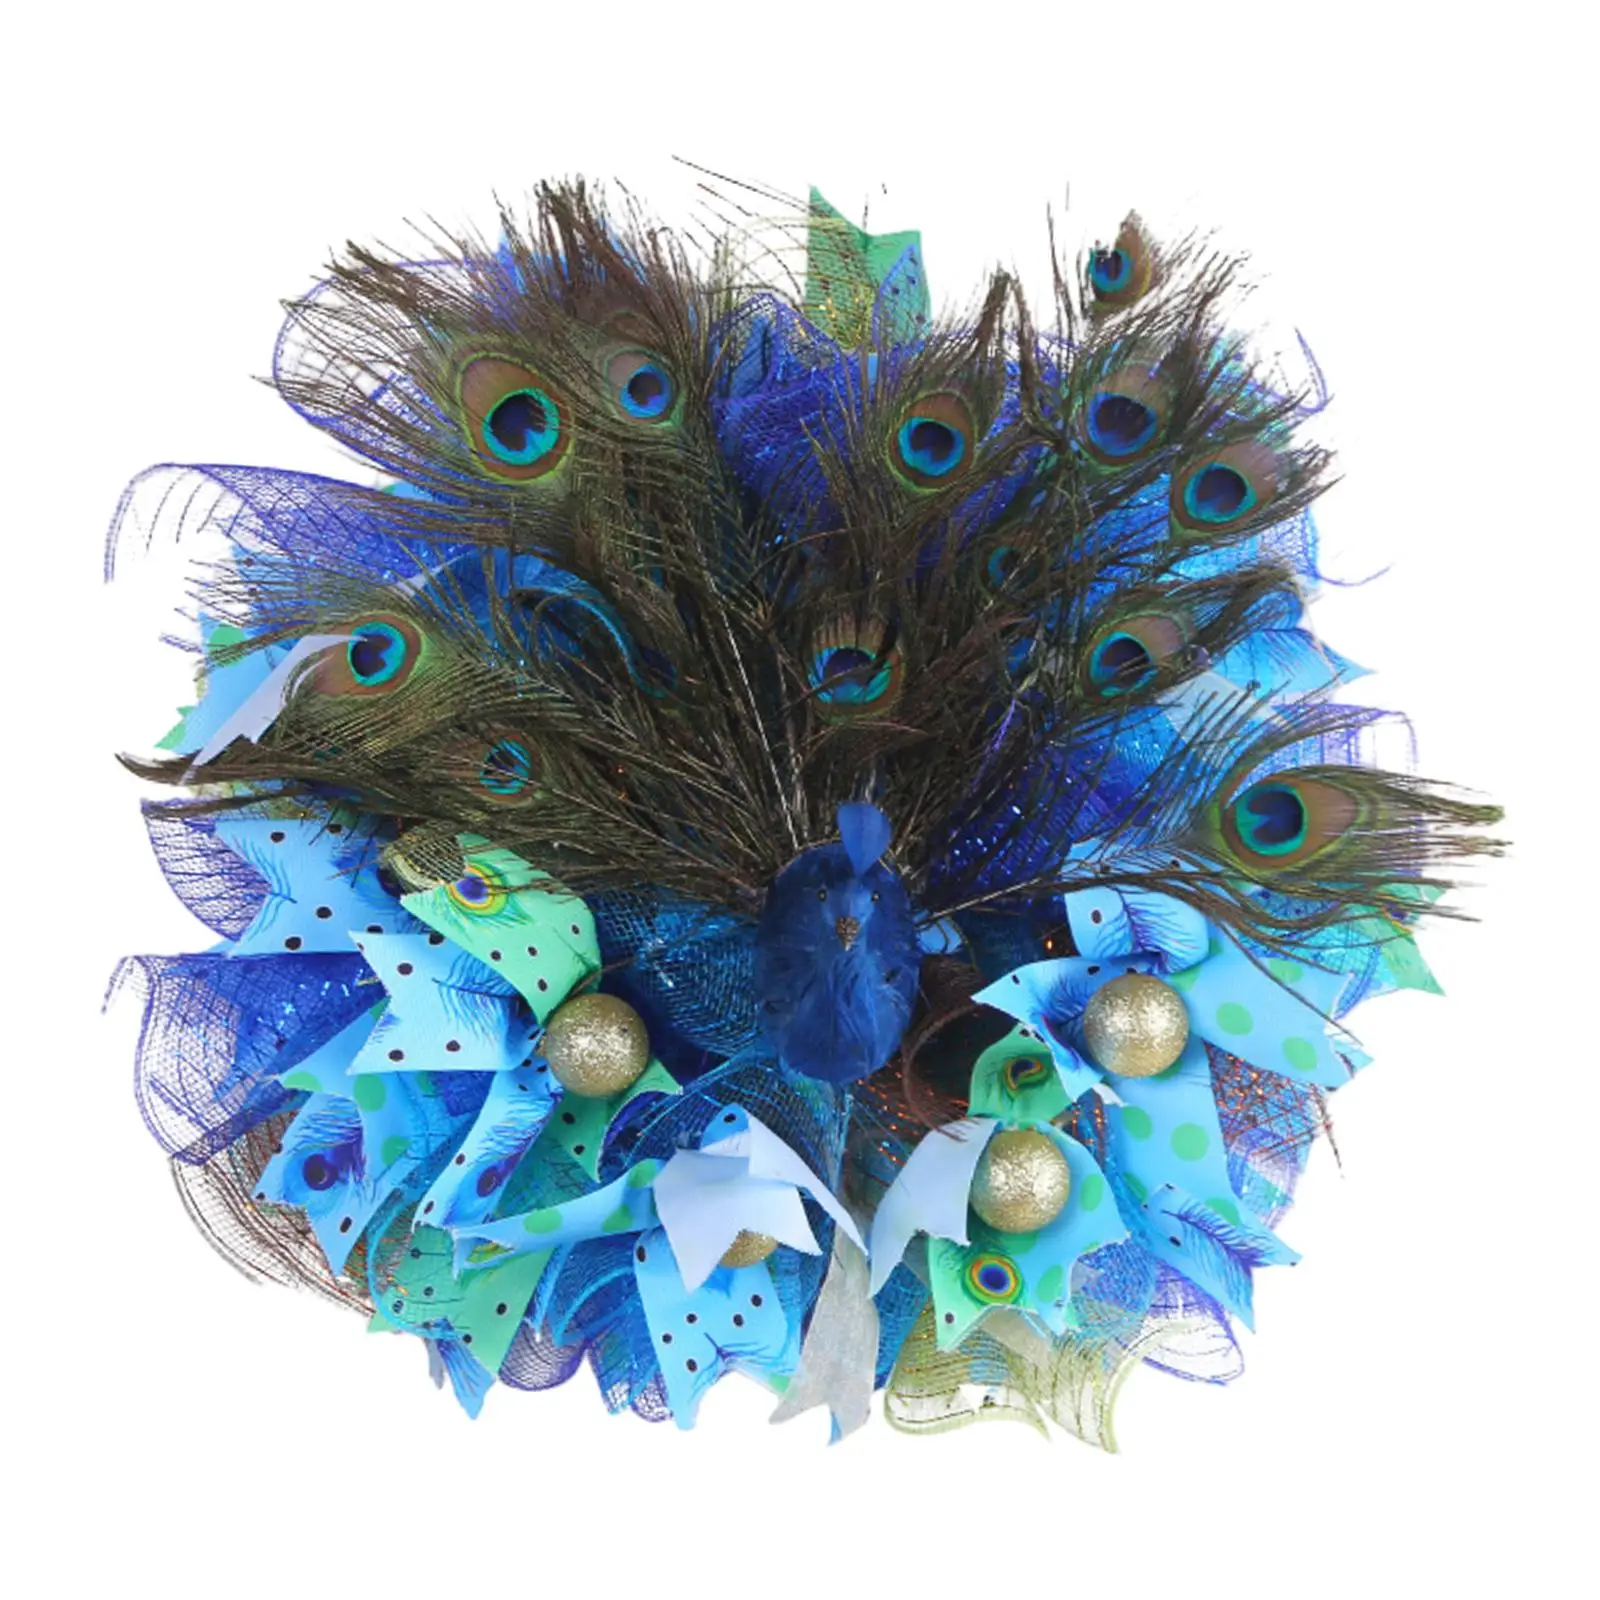 Artificial Peacock Wreath Front Door Wreath Window Simulated Feather Garland